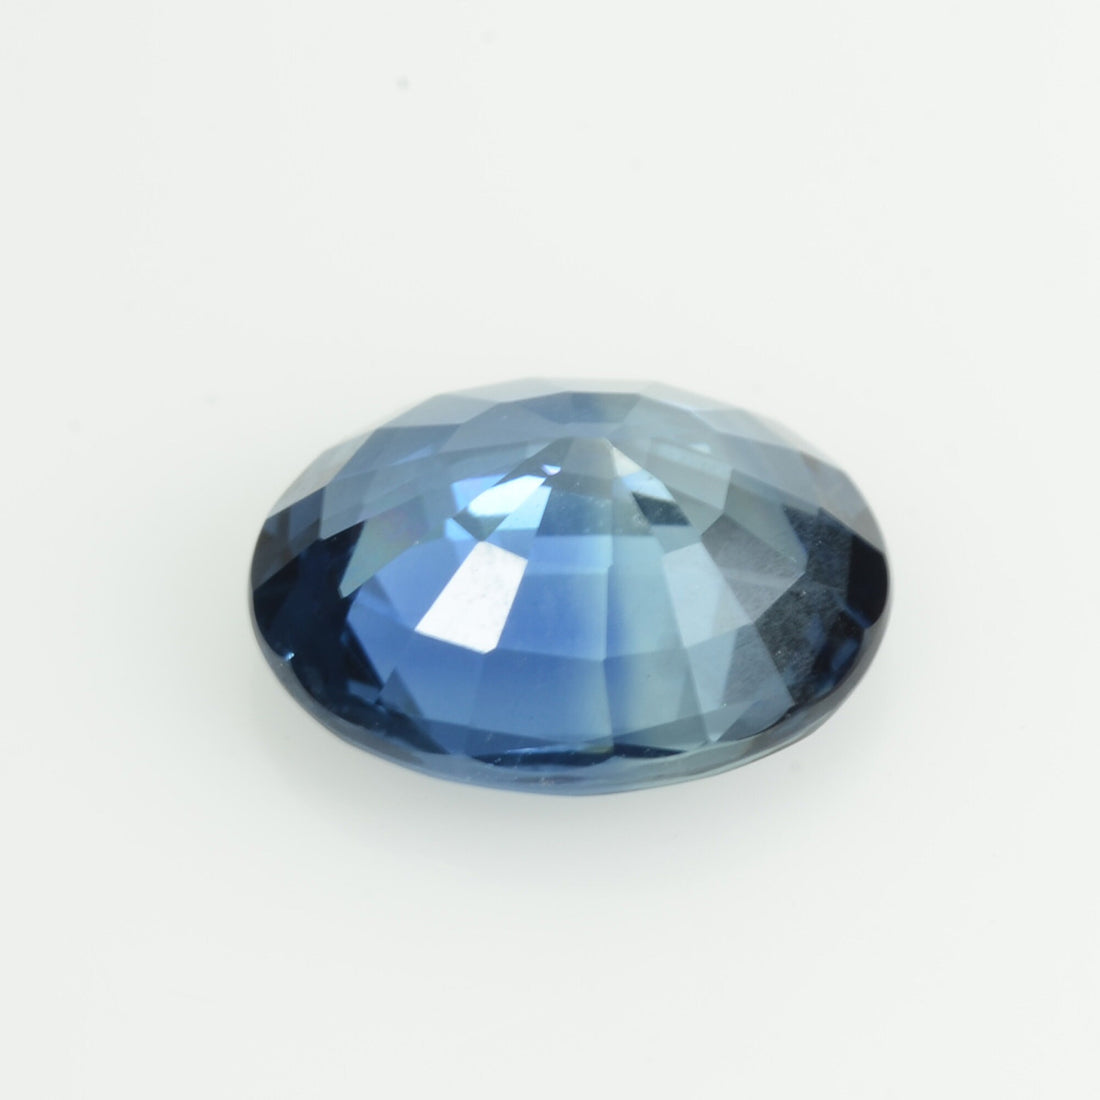 2.51 cts Natural Blue Sapphire Loose Gemstone Oval Cut